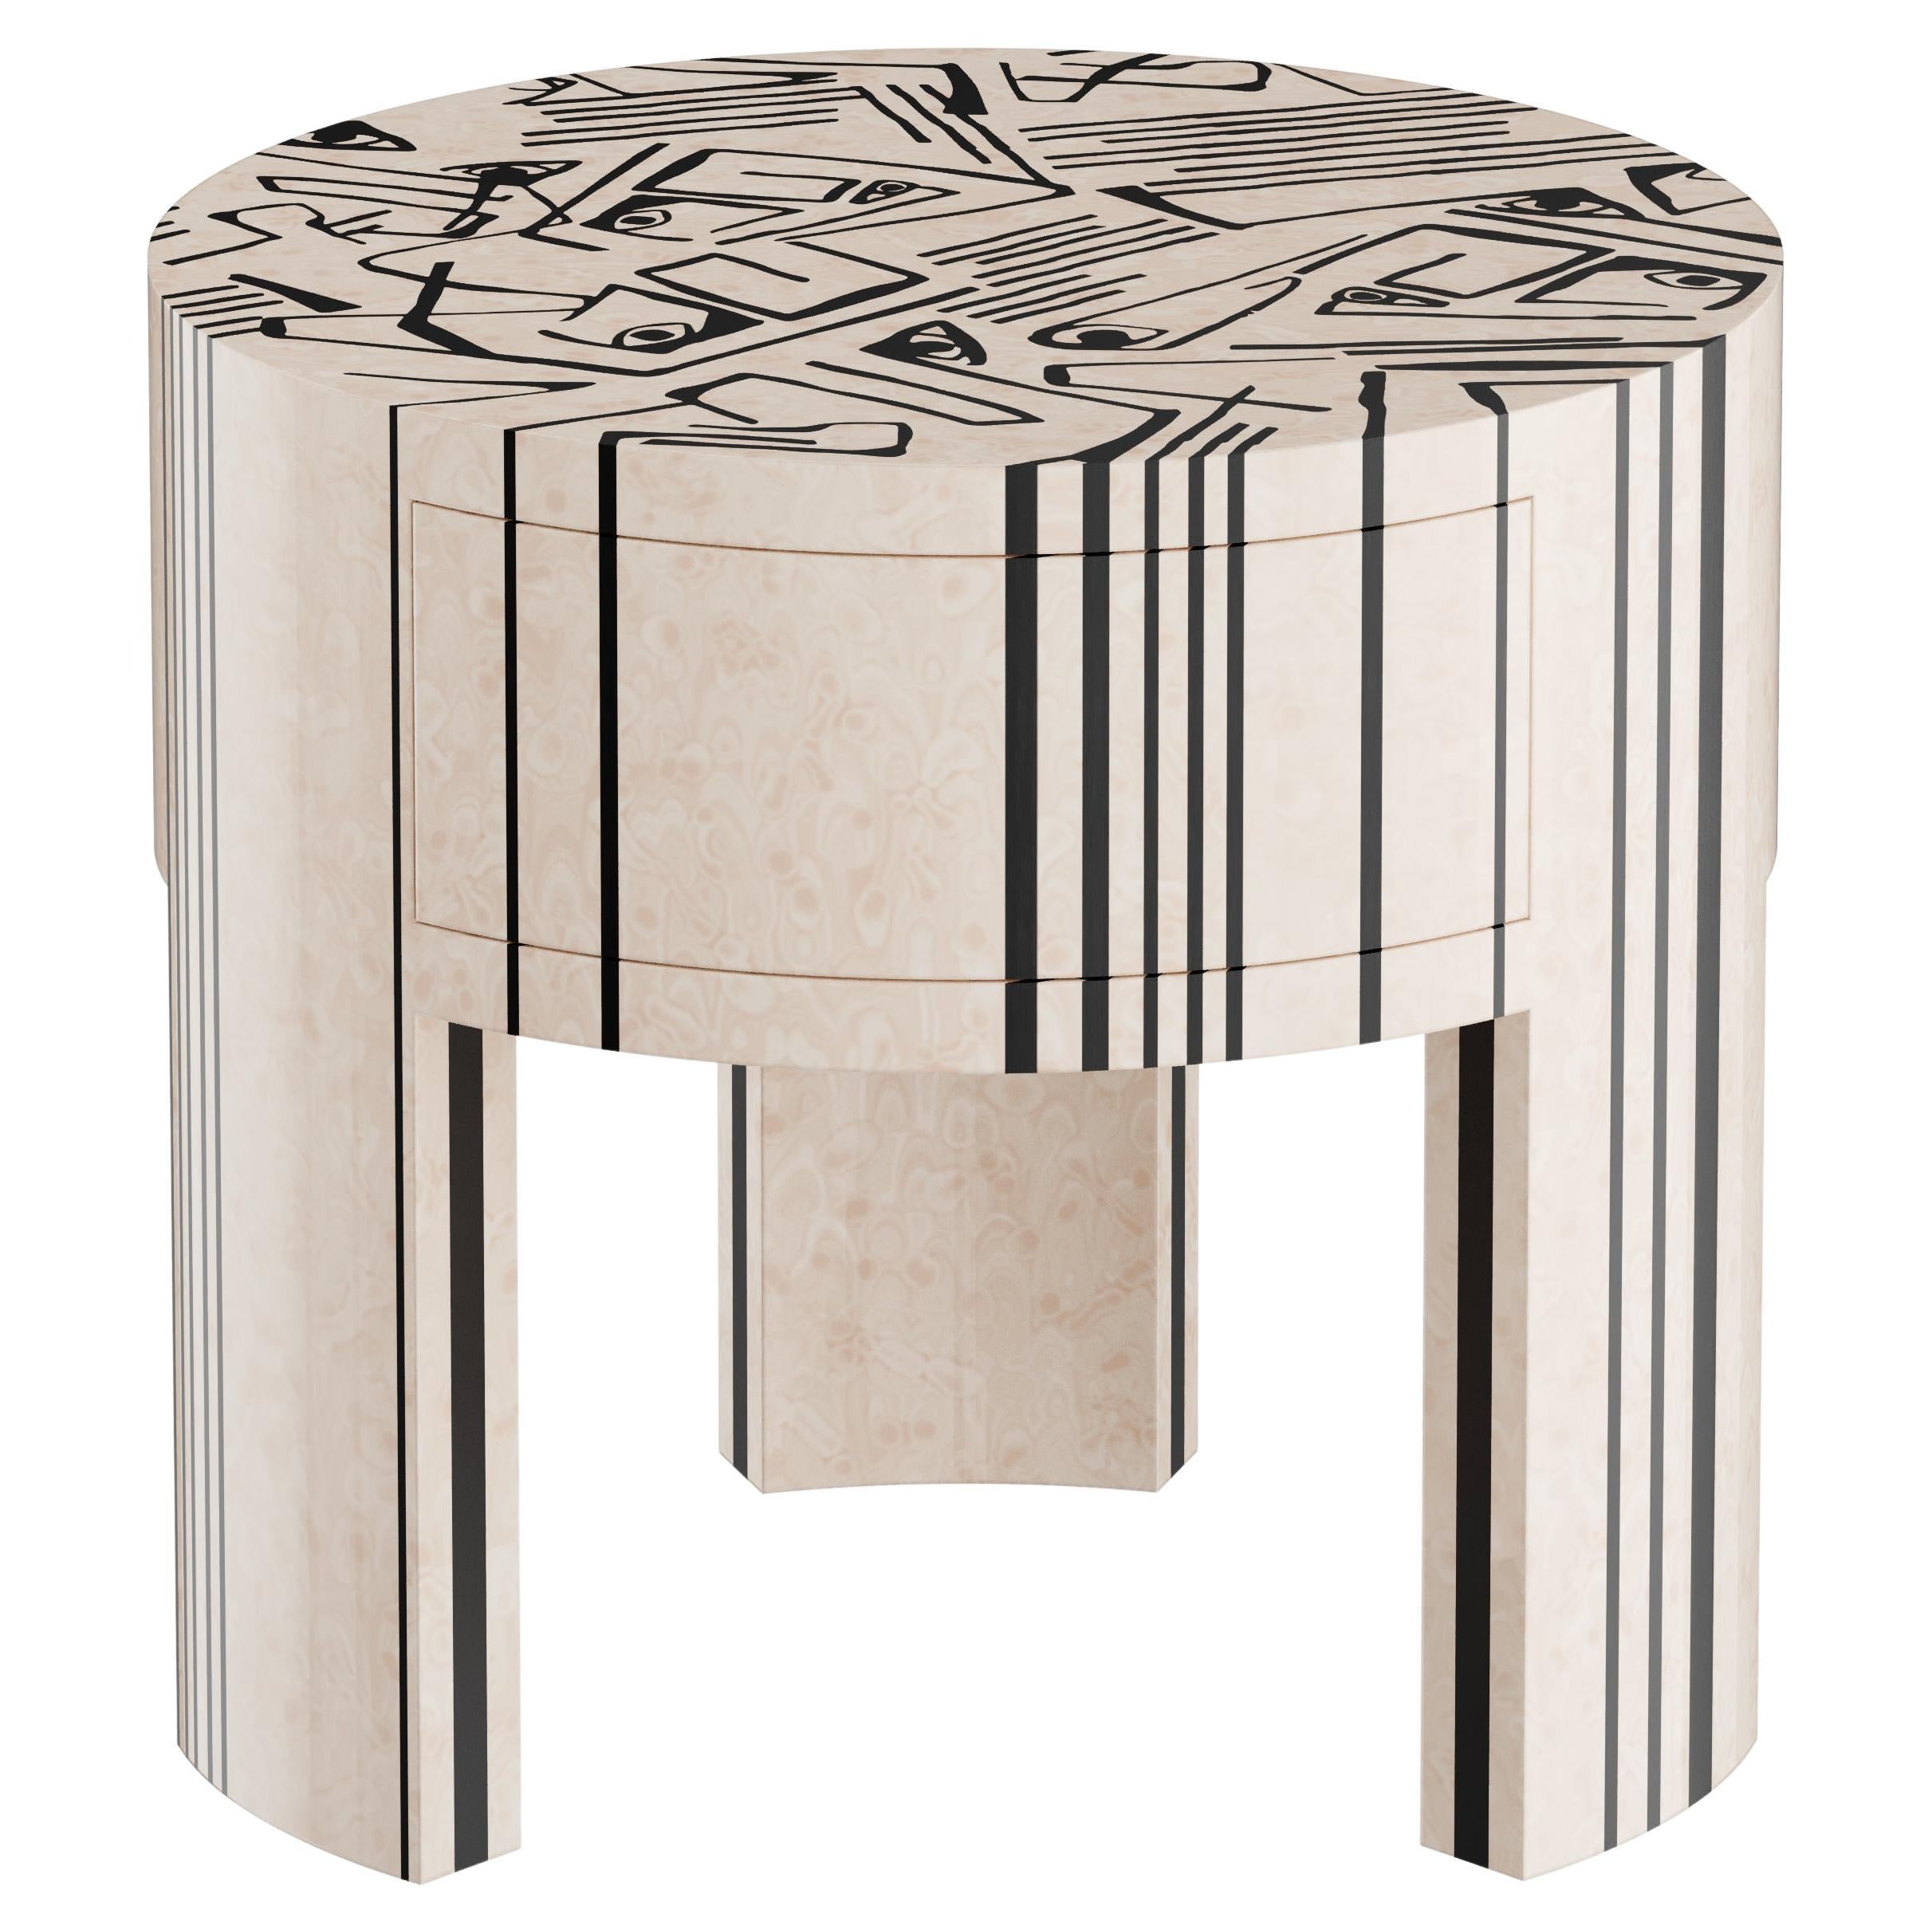 Modern Picasso Round Bedside Table, Nightstand Black & White Wood Marquetry